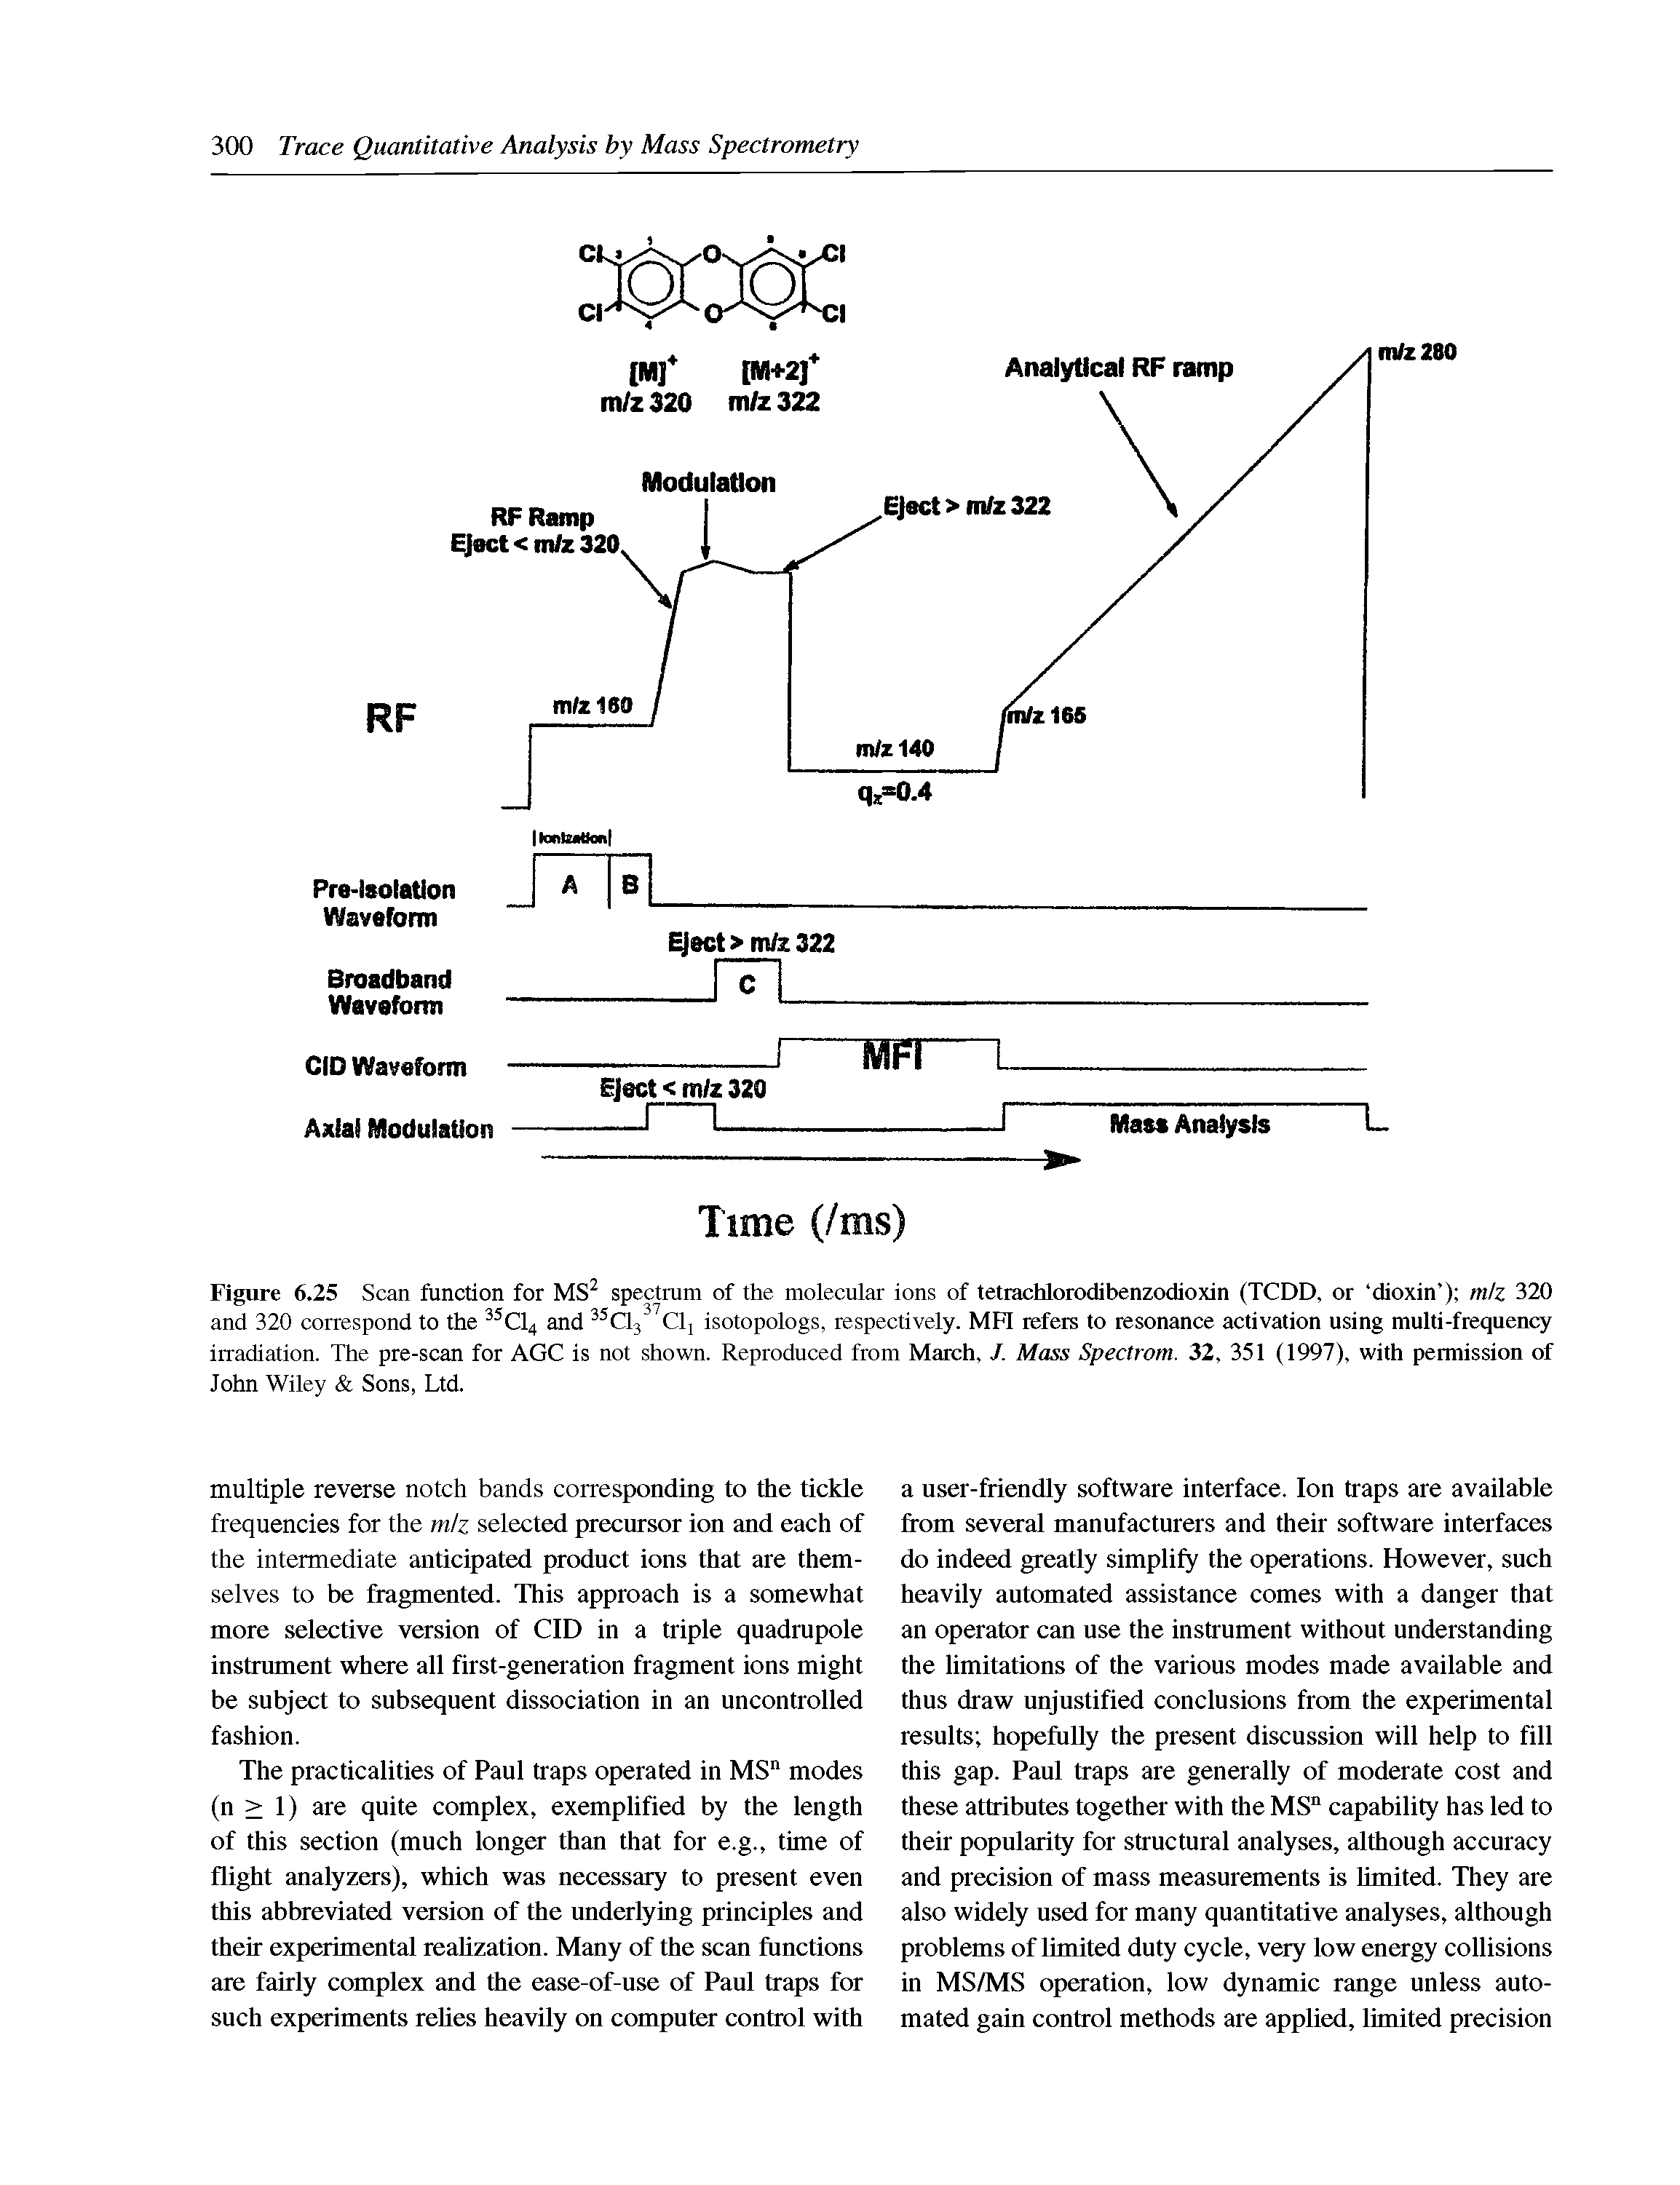 Figure 6.25 Scan function for MS spectrum of the molecular ions of tetrachlorodibenzodioxin (TCDD, or dioxin ) m/z 320 and 320 correspond to the Cl4 and Cl3 Cli isotopologs, respectively. MFI refers to resonance activation using multi-frequency irradiation. The pre-scan for AGC is not shown. Reproduced from March, J. Mass Spectrom. 32, 351 (1997), with permission of John Wiley Sons, Ltd.